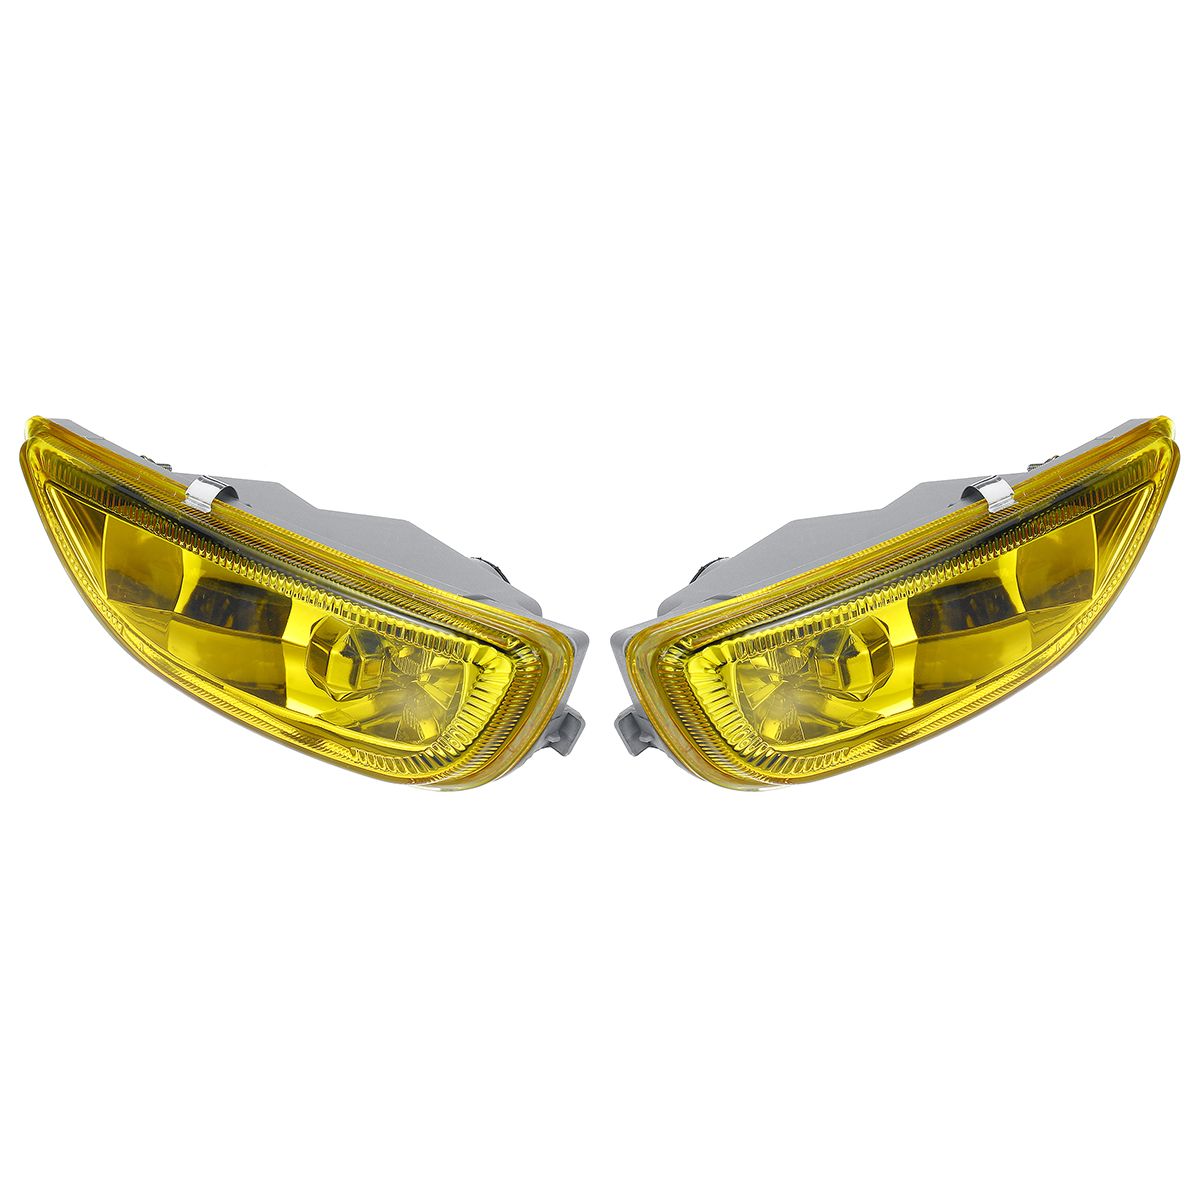 12V-Car-Front-Bumper-Fog-Lights-Yellow-Driving-Lamp-for-Toyota-Corolla-2001-2002-1423932